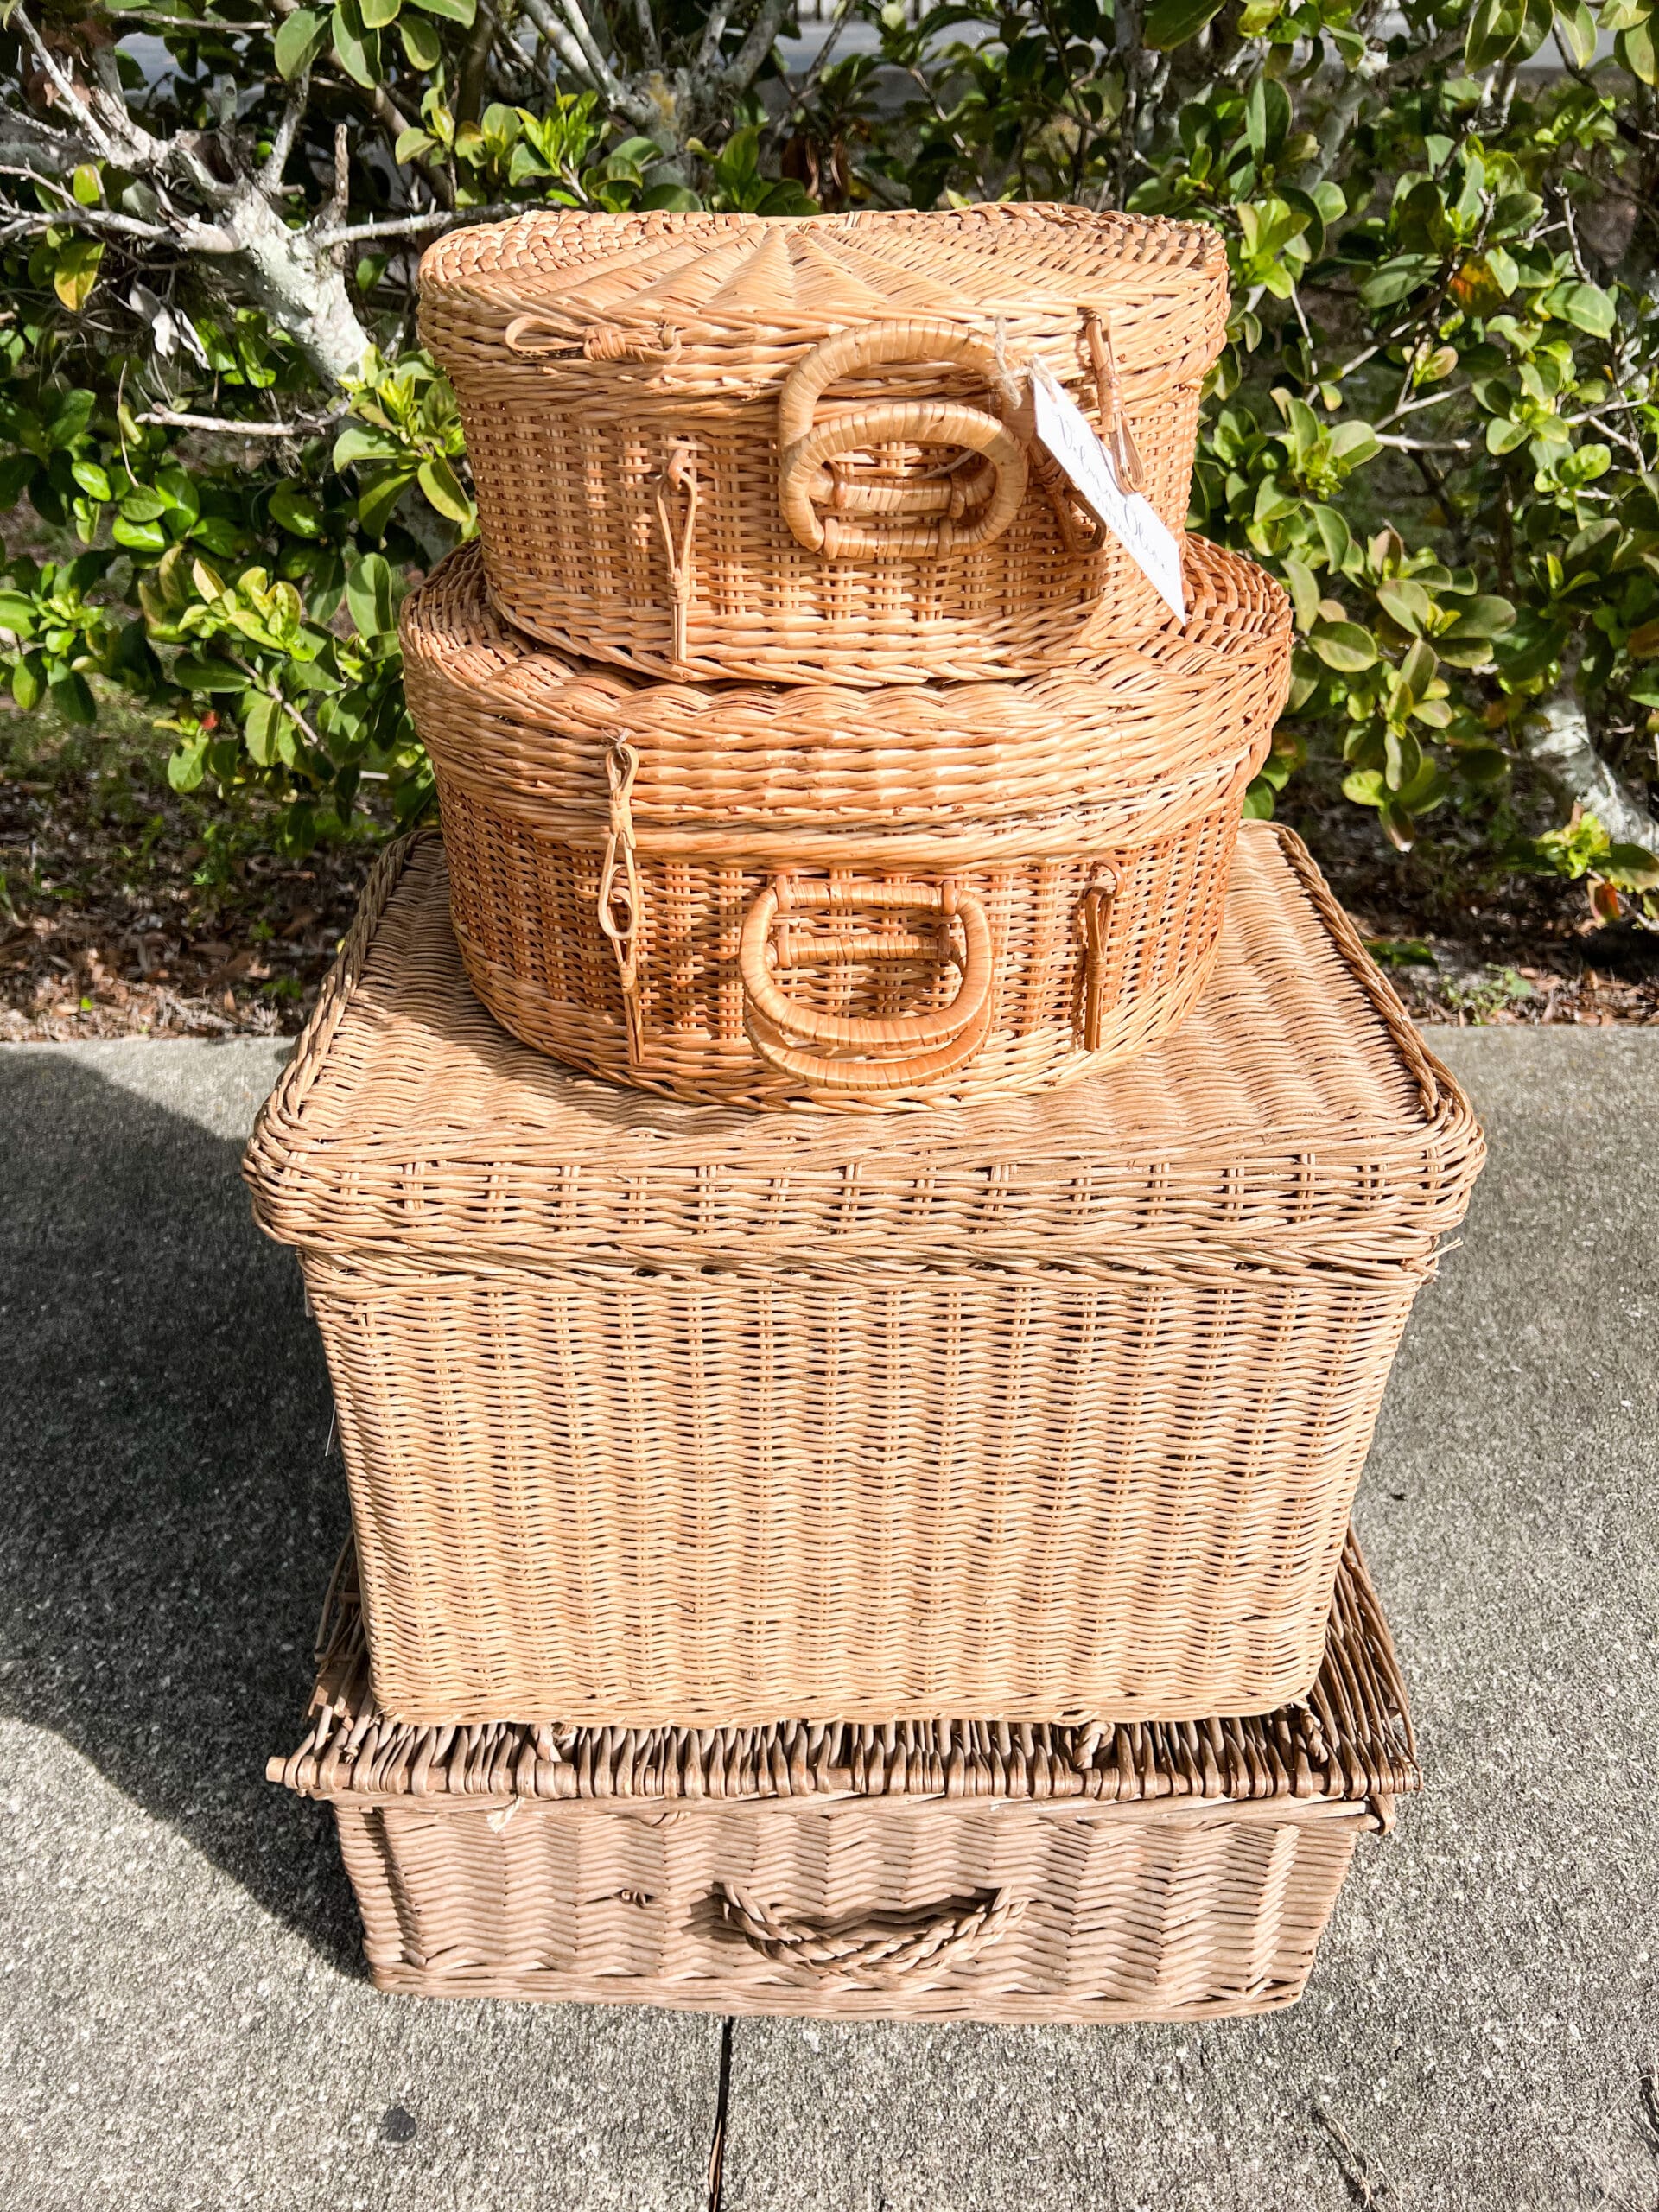 https://robynsfrenchnest.com/wp-content/uploads/2022/05/Thrifted-baskets-scaled.jpg